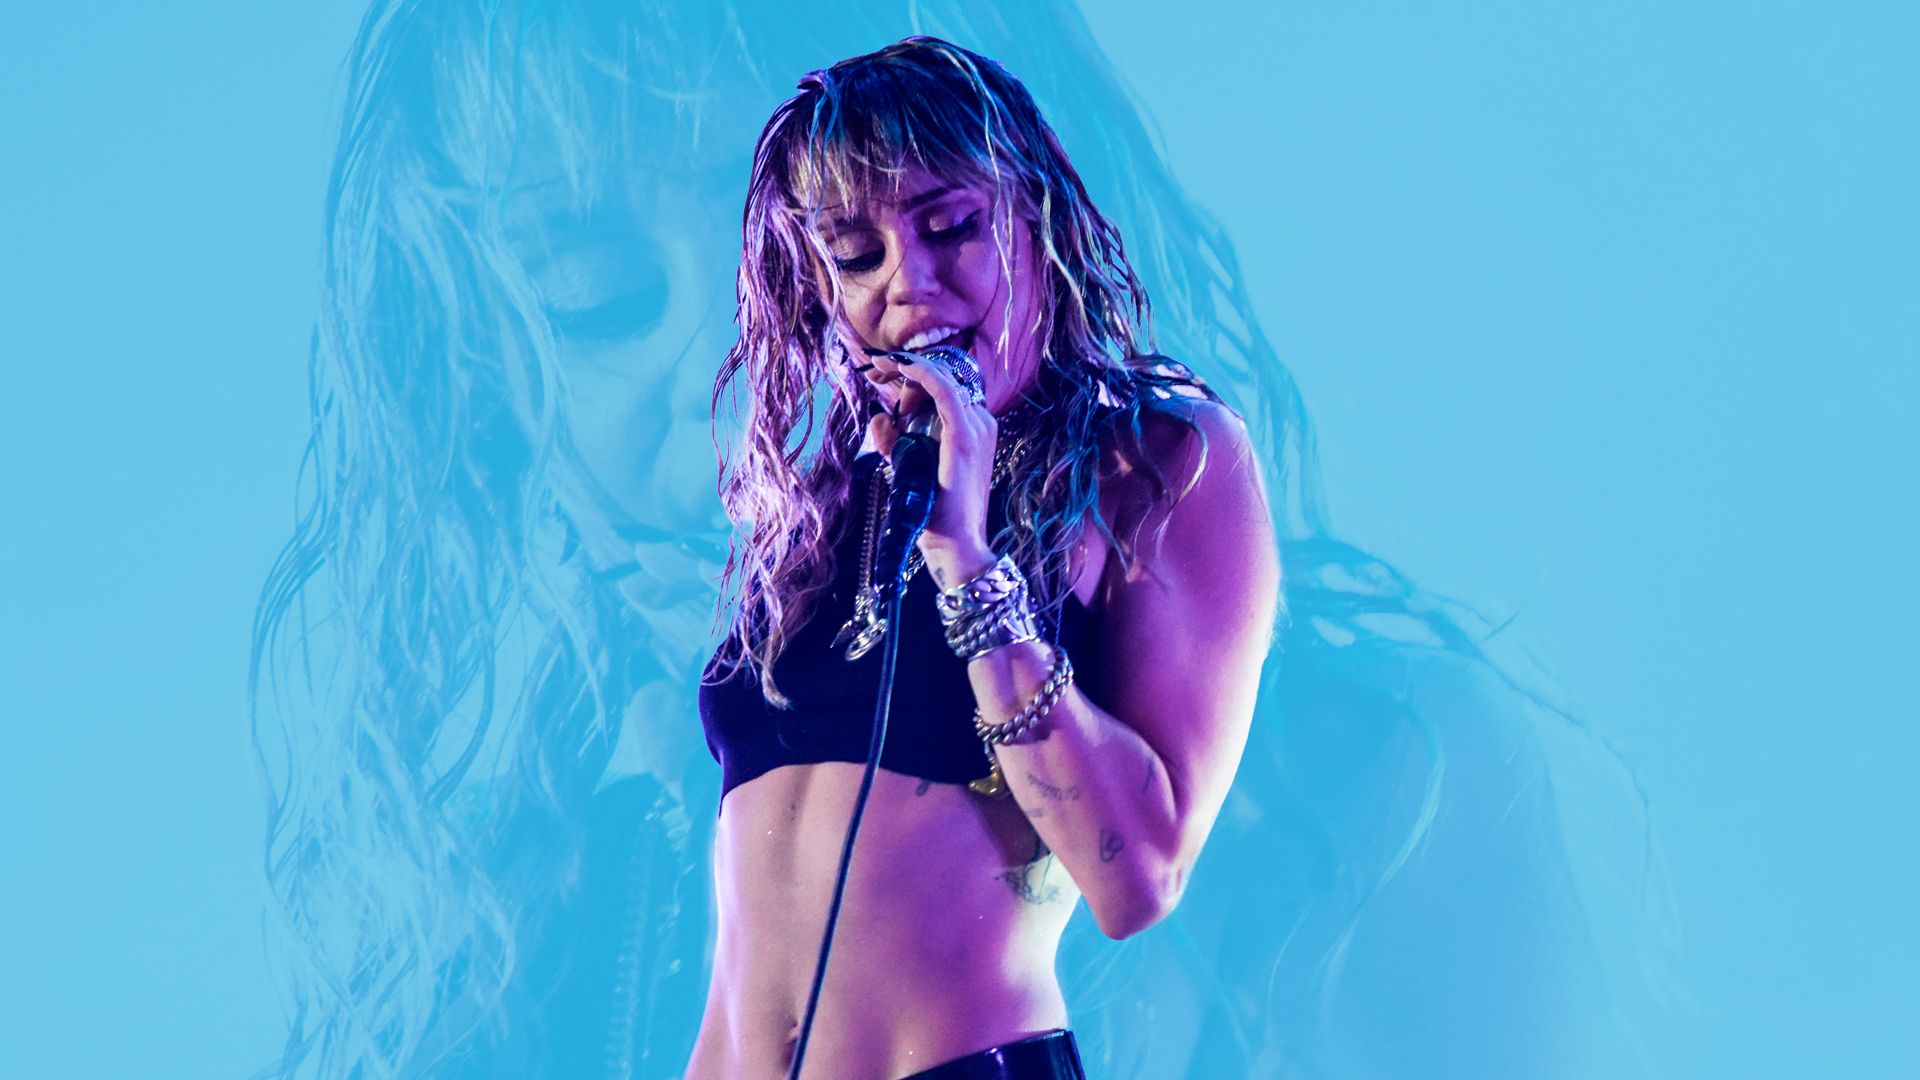 Miley Cyrus Midnight Sky Review: A song of a free, Wild Woman